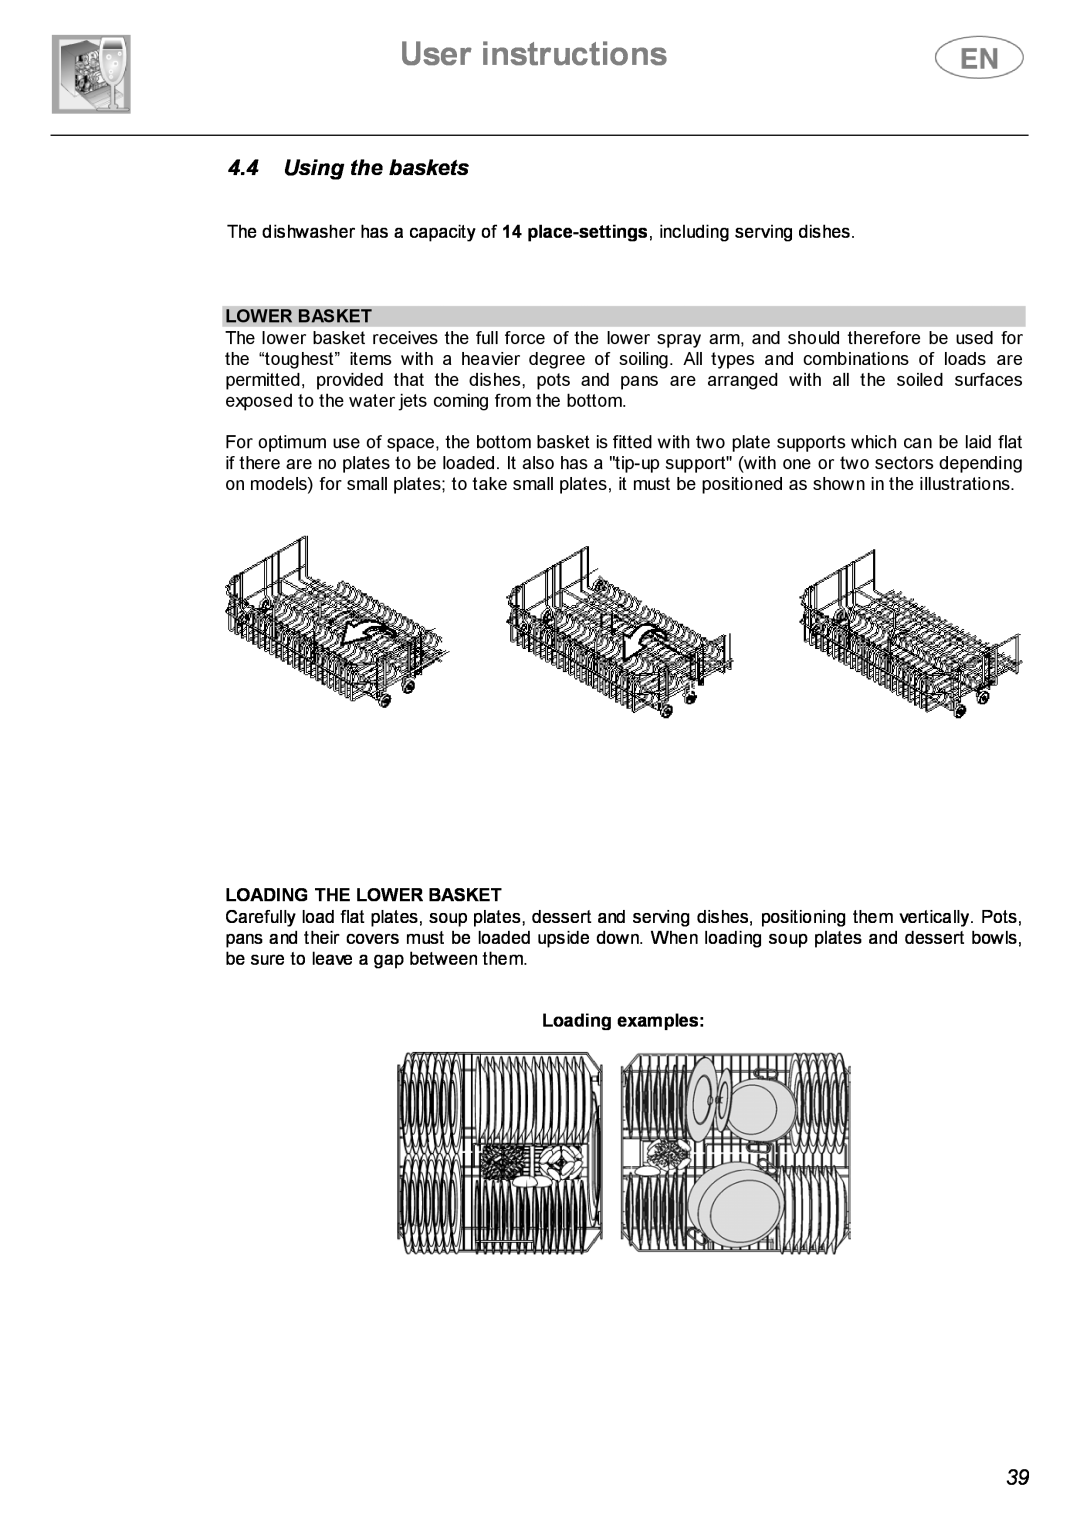 Smeg DWF614SS, DWF614WH manual User instructions, 4.4Using the baskets, Loading The Lower Basket, Loading examples 